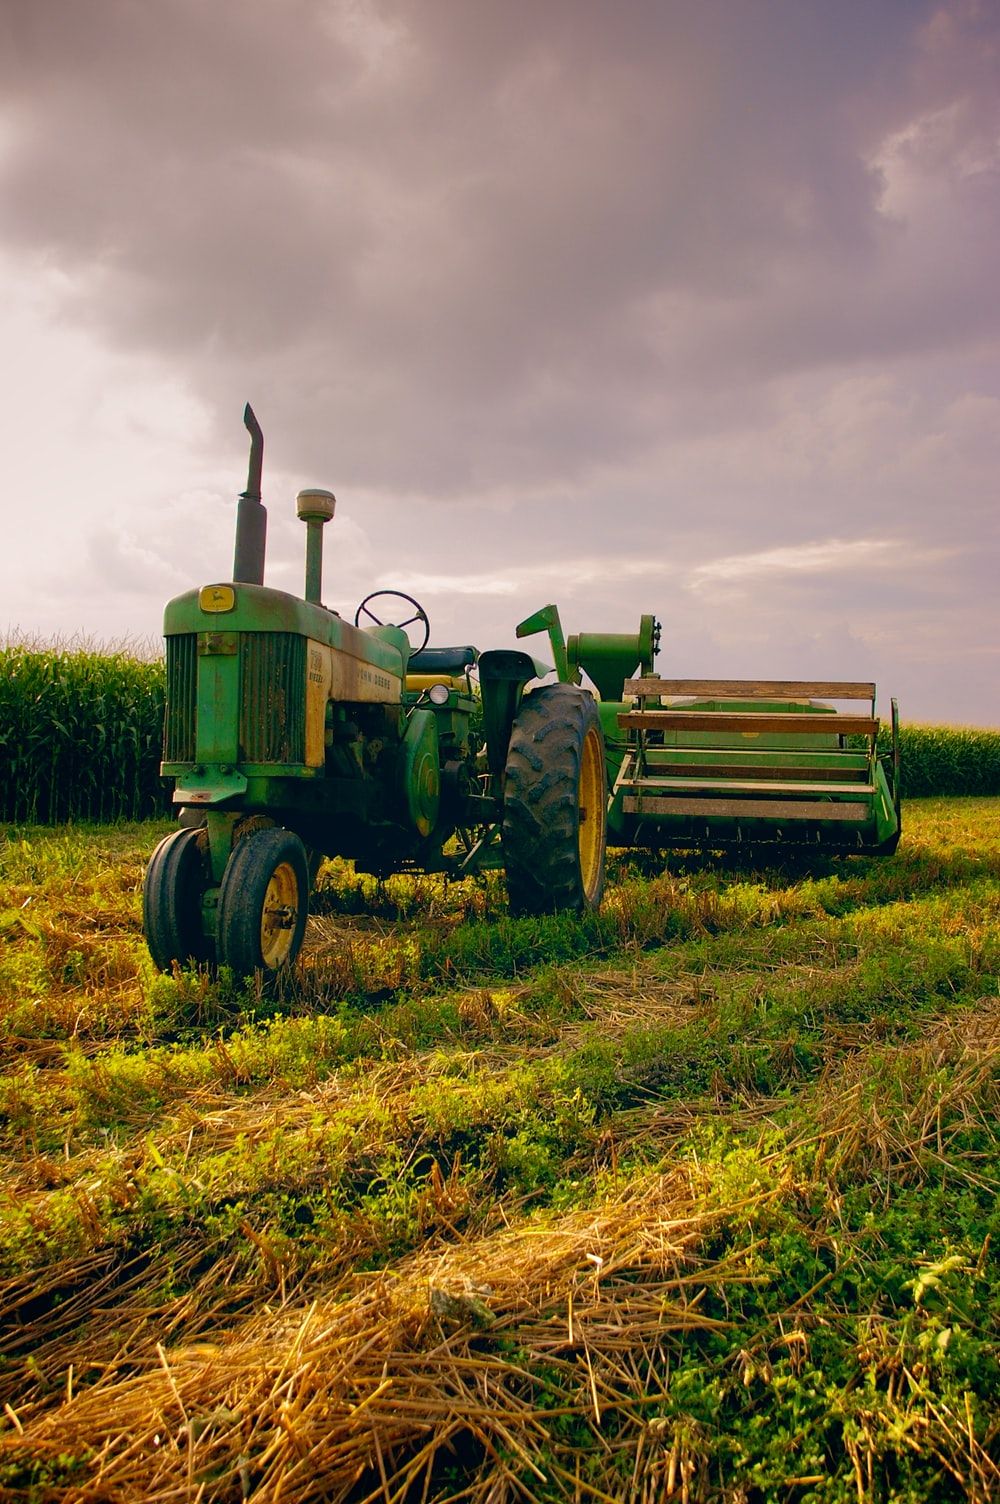 A tractor is parked in the middle of an open field - Farm